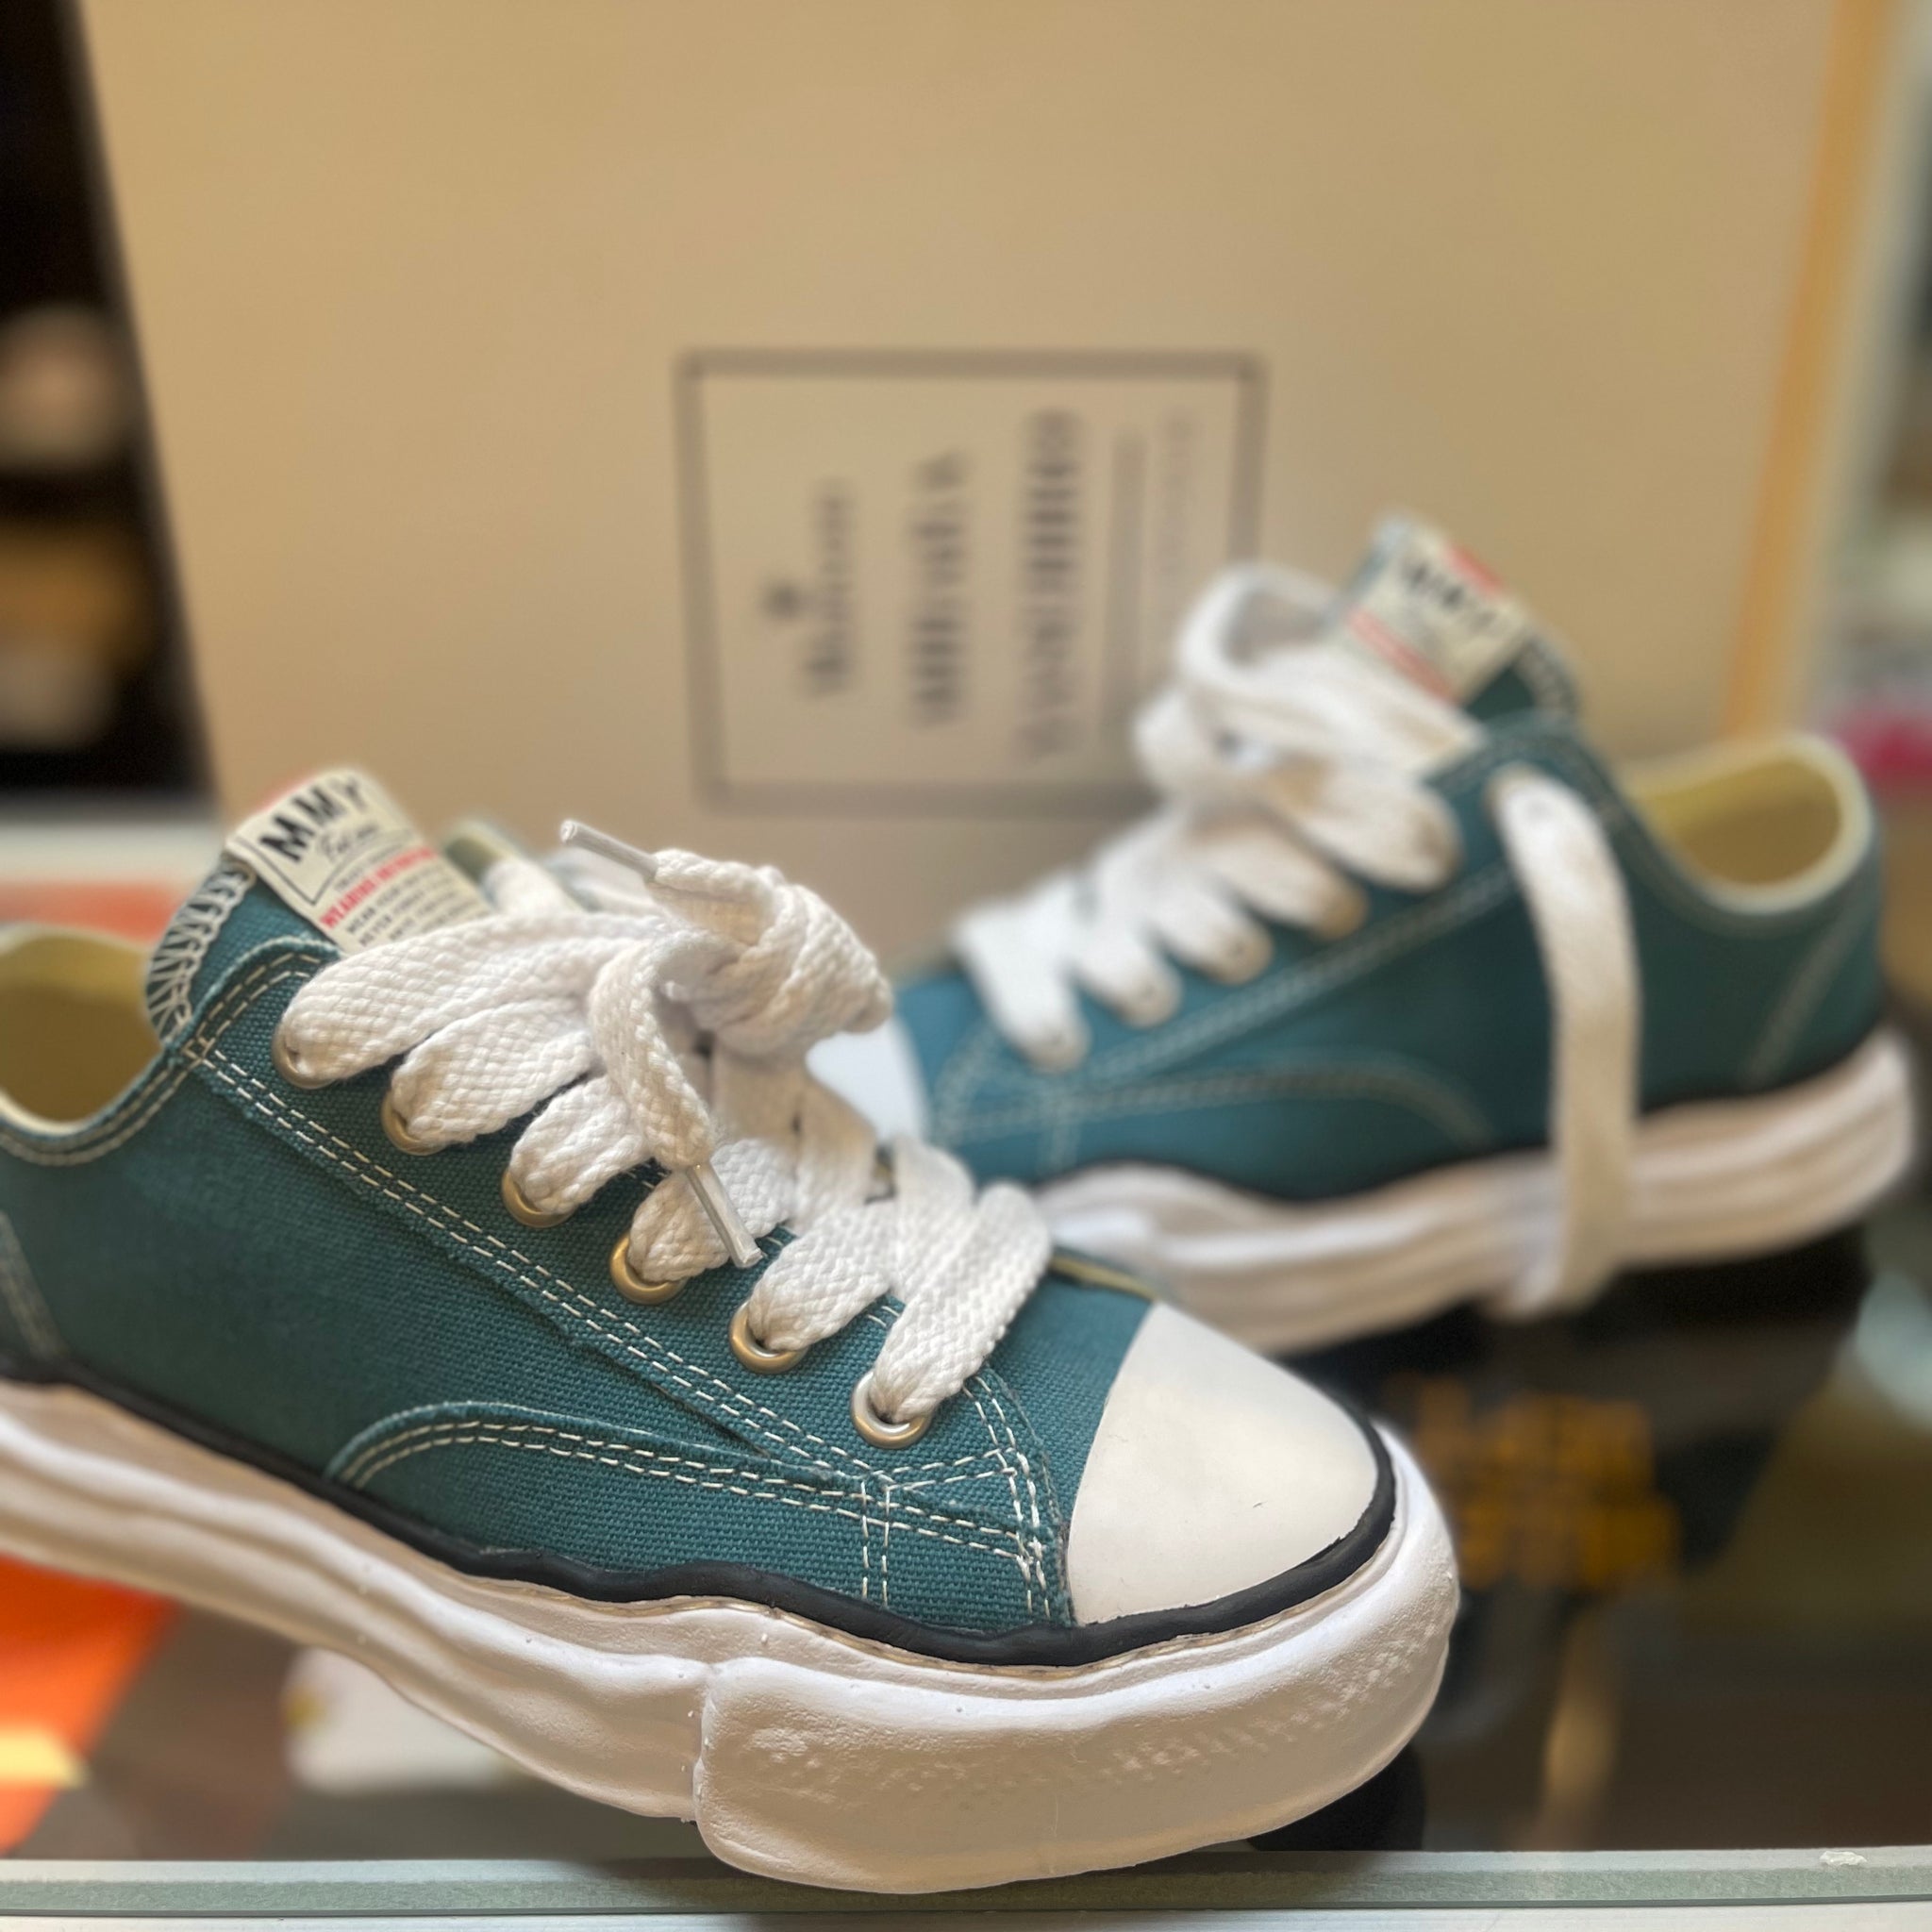 Maison Mihara Melted Sneaker "Turquoise"